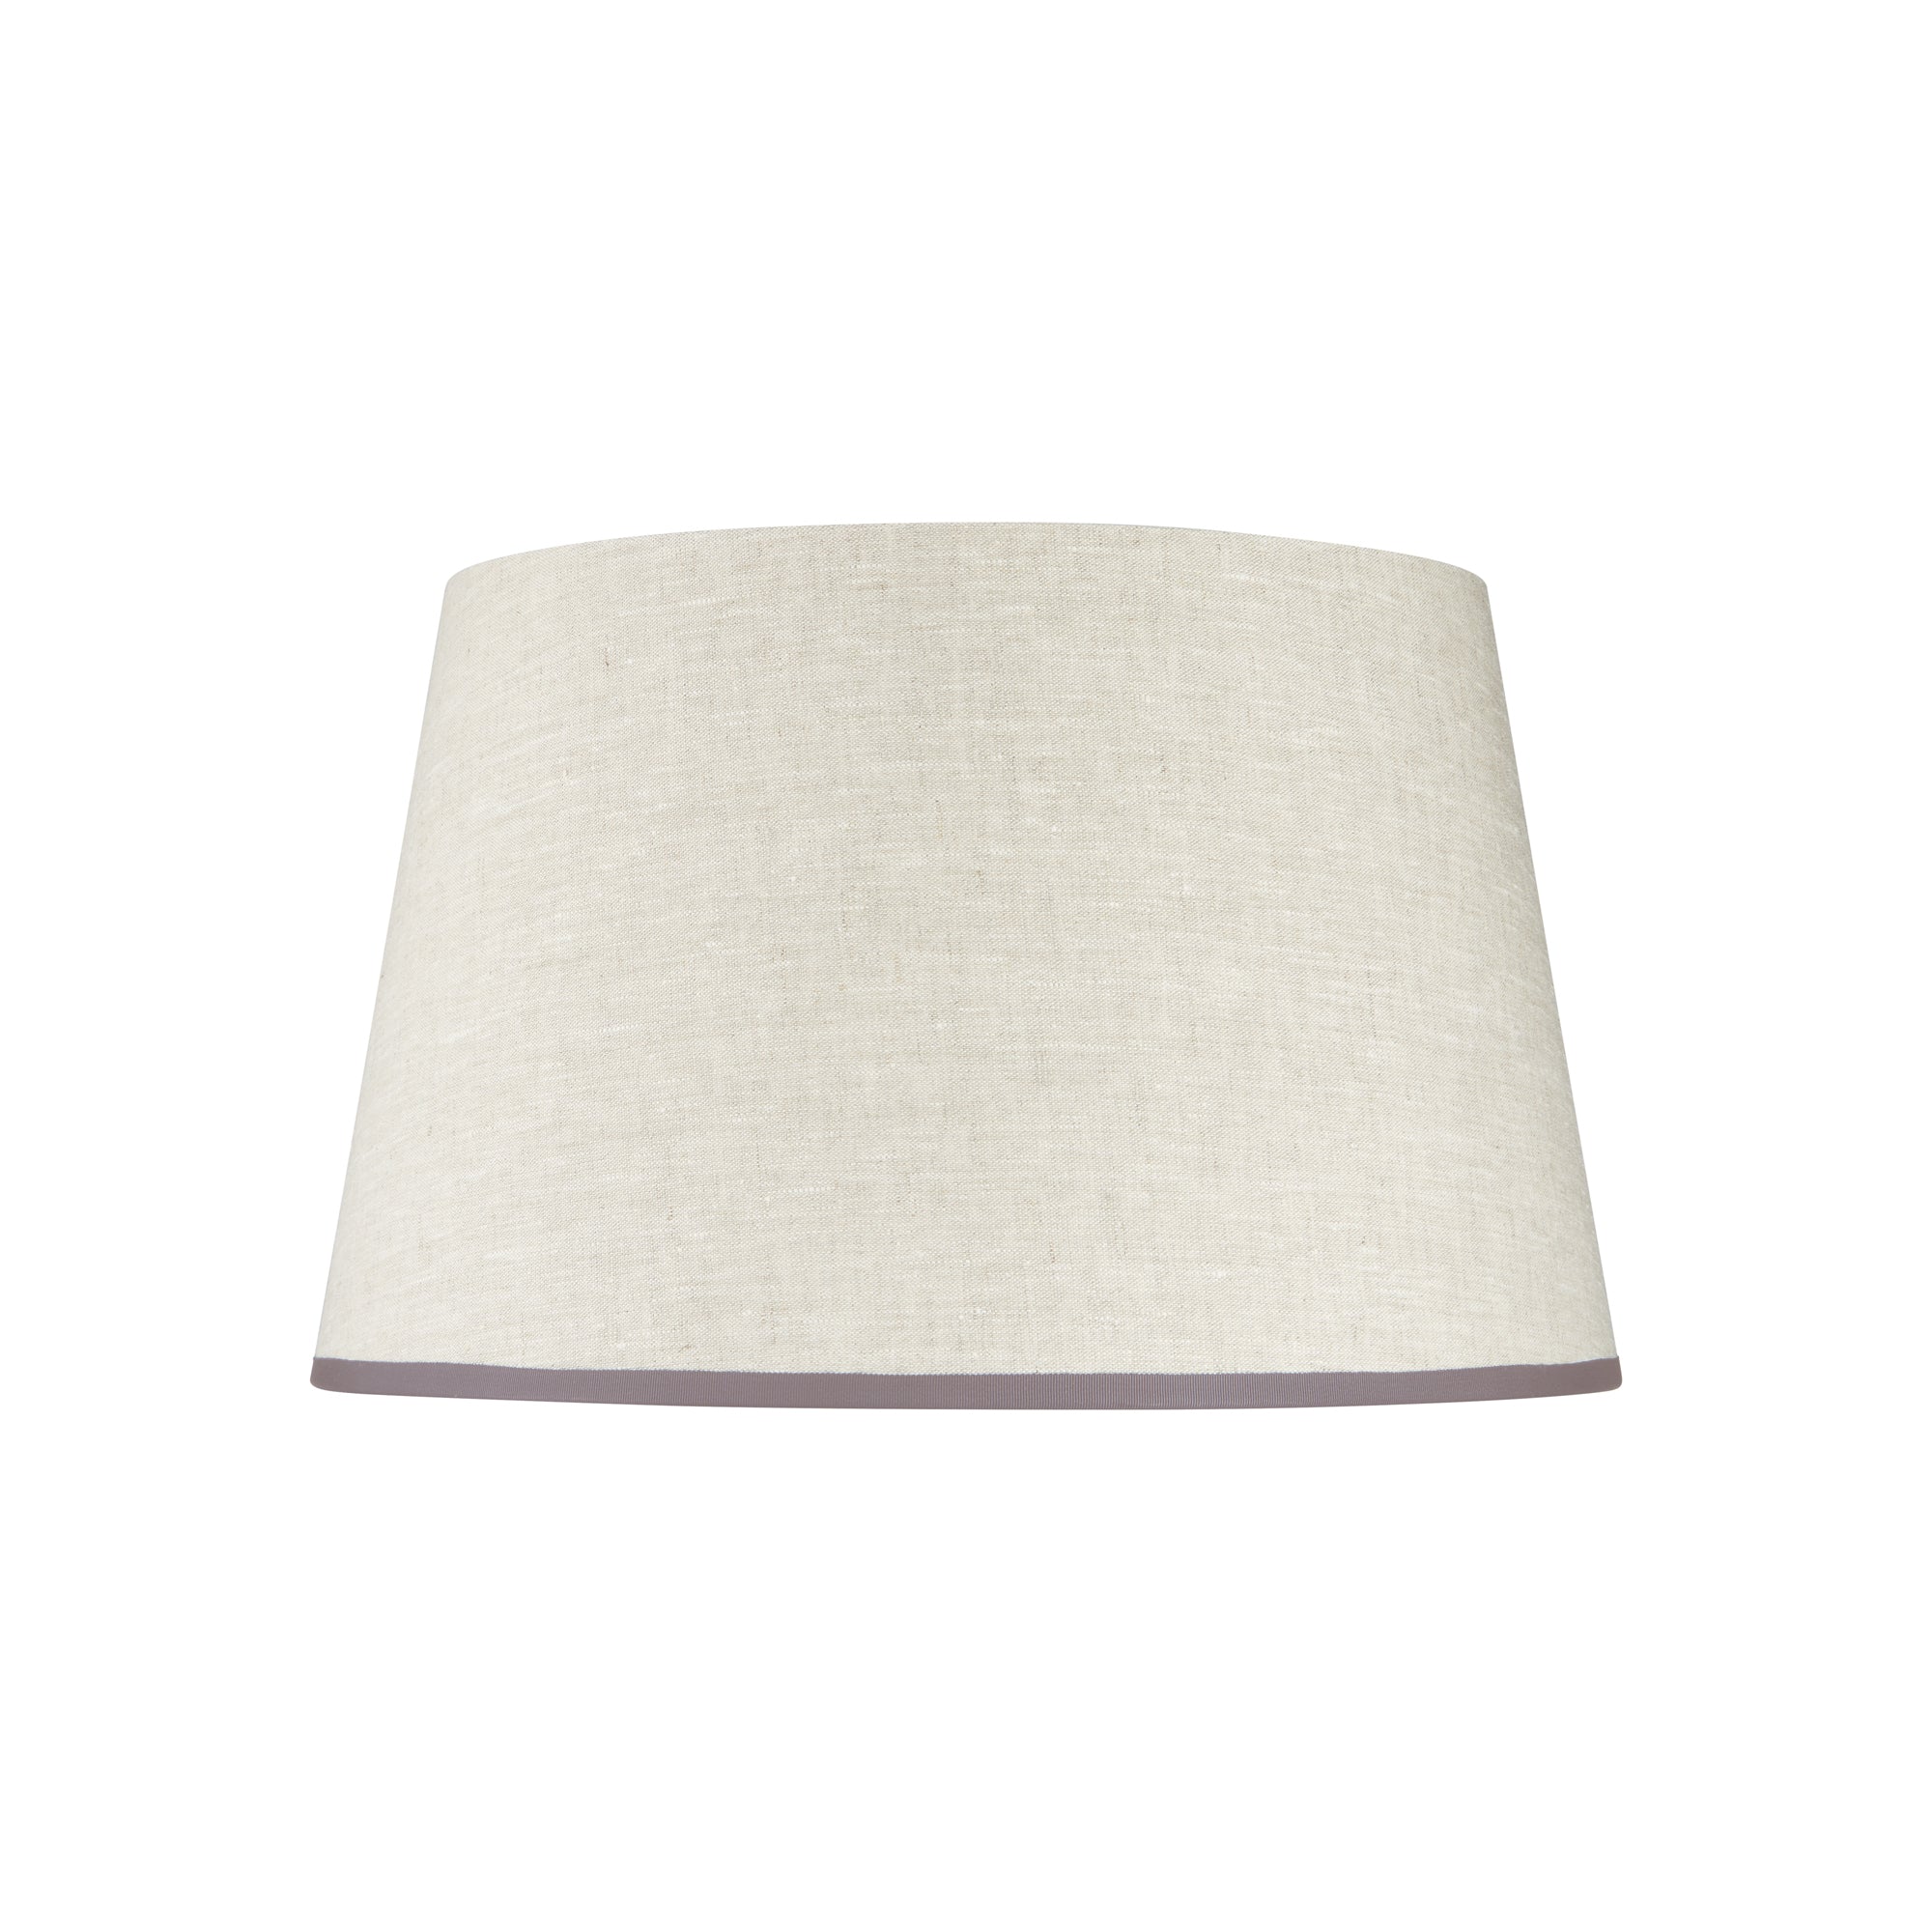 STRETCHED CREAM LINEN LAMPSHADE WITH SHADES OF GREY TRIM